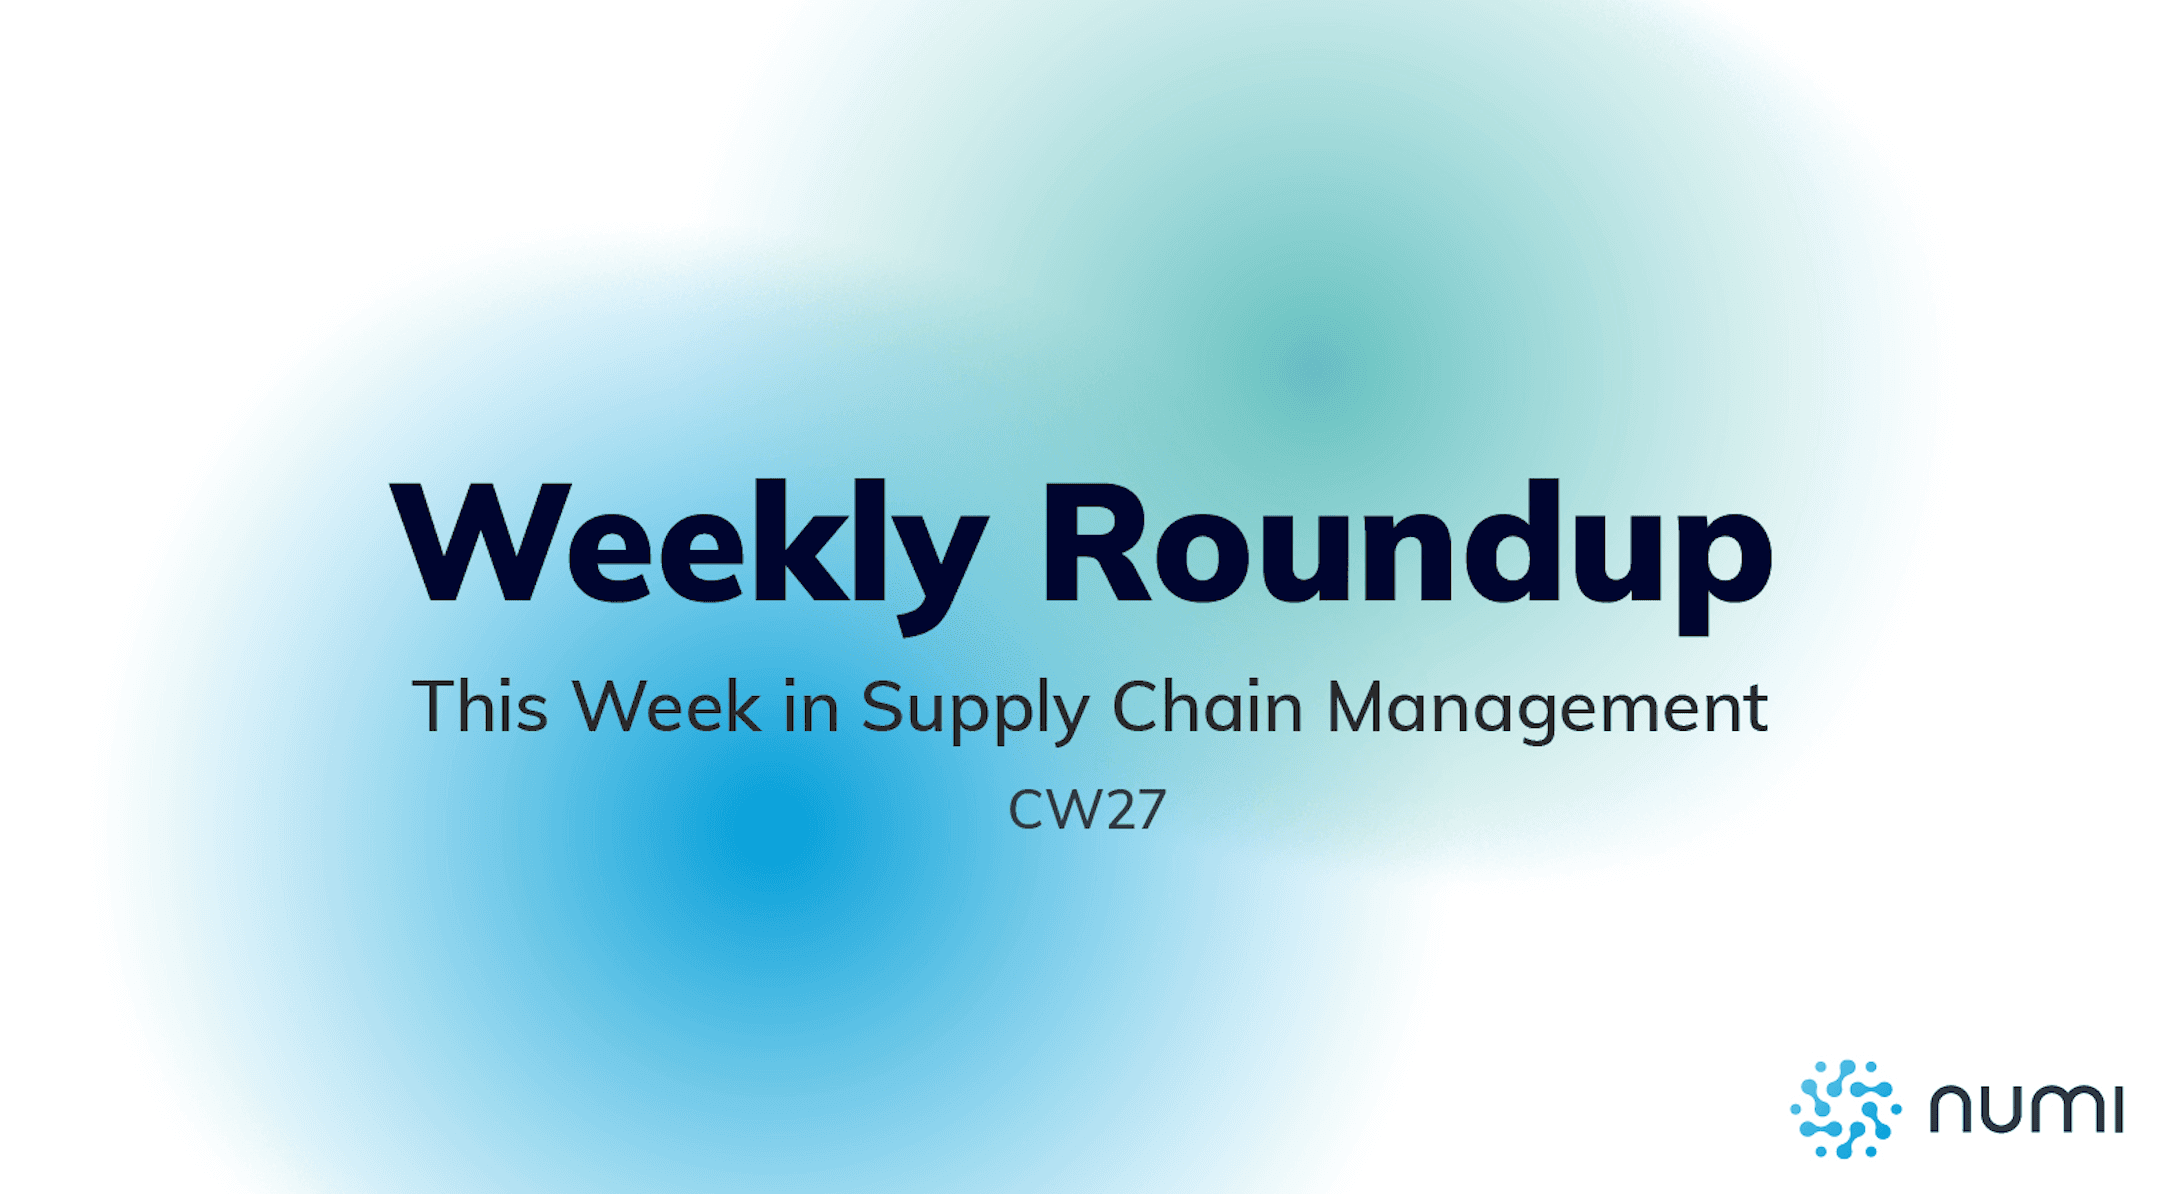 Weekly Roundup - PwC’s Supply Chain Compass, dm-Drogerie Markt’s Semi-Automated Project and E-commerce Rise in Germany